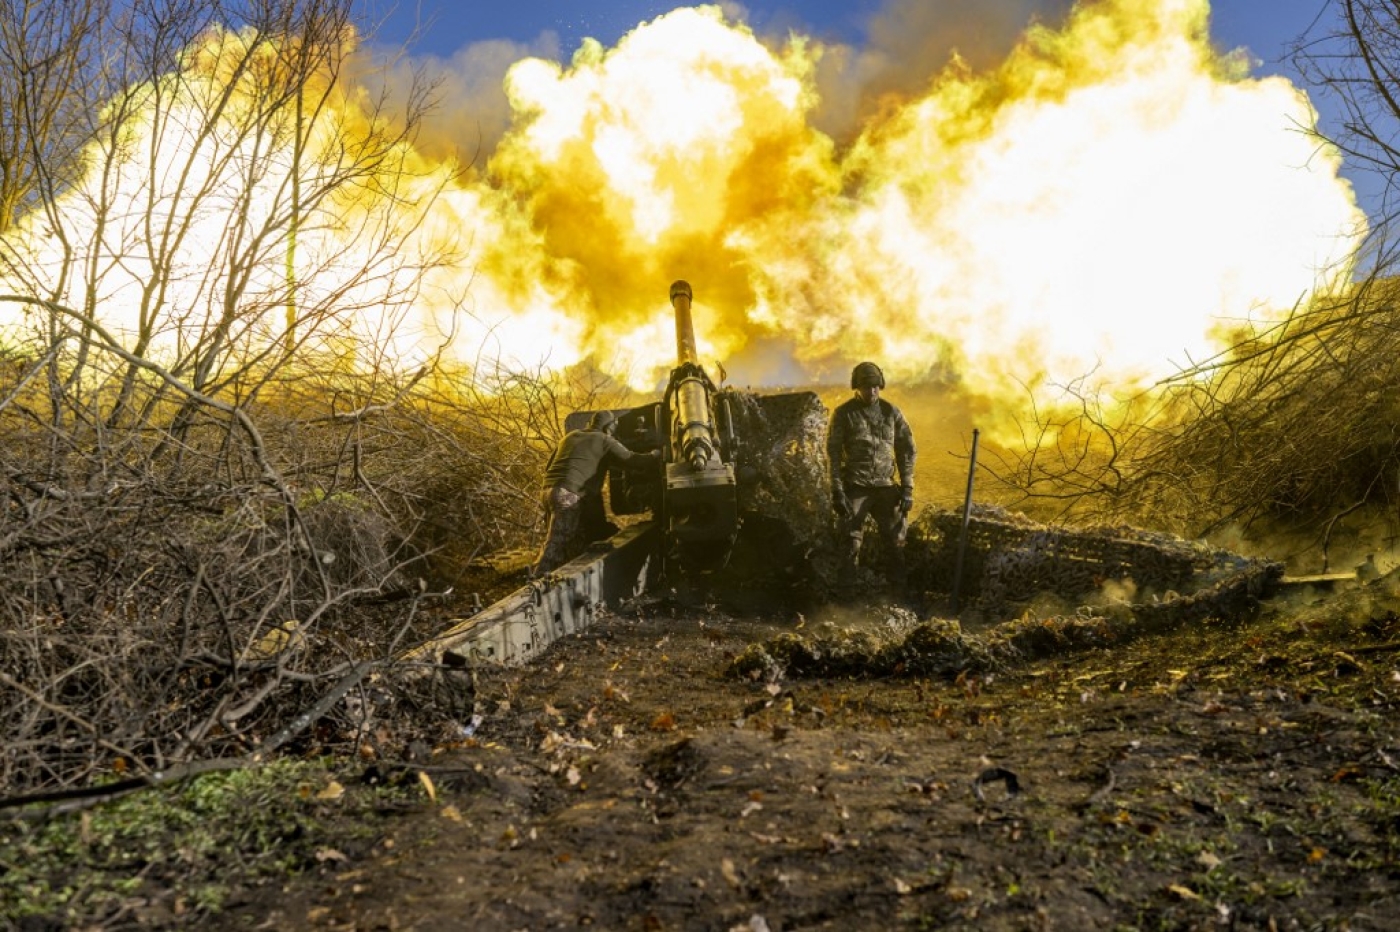 A Ukrainian soldier of an artillery unit fires towards Russian positions outside Bakhmut on November 8, 2022, amid the Russian invasion of Ukraine.